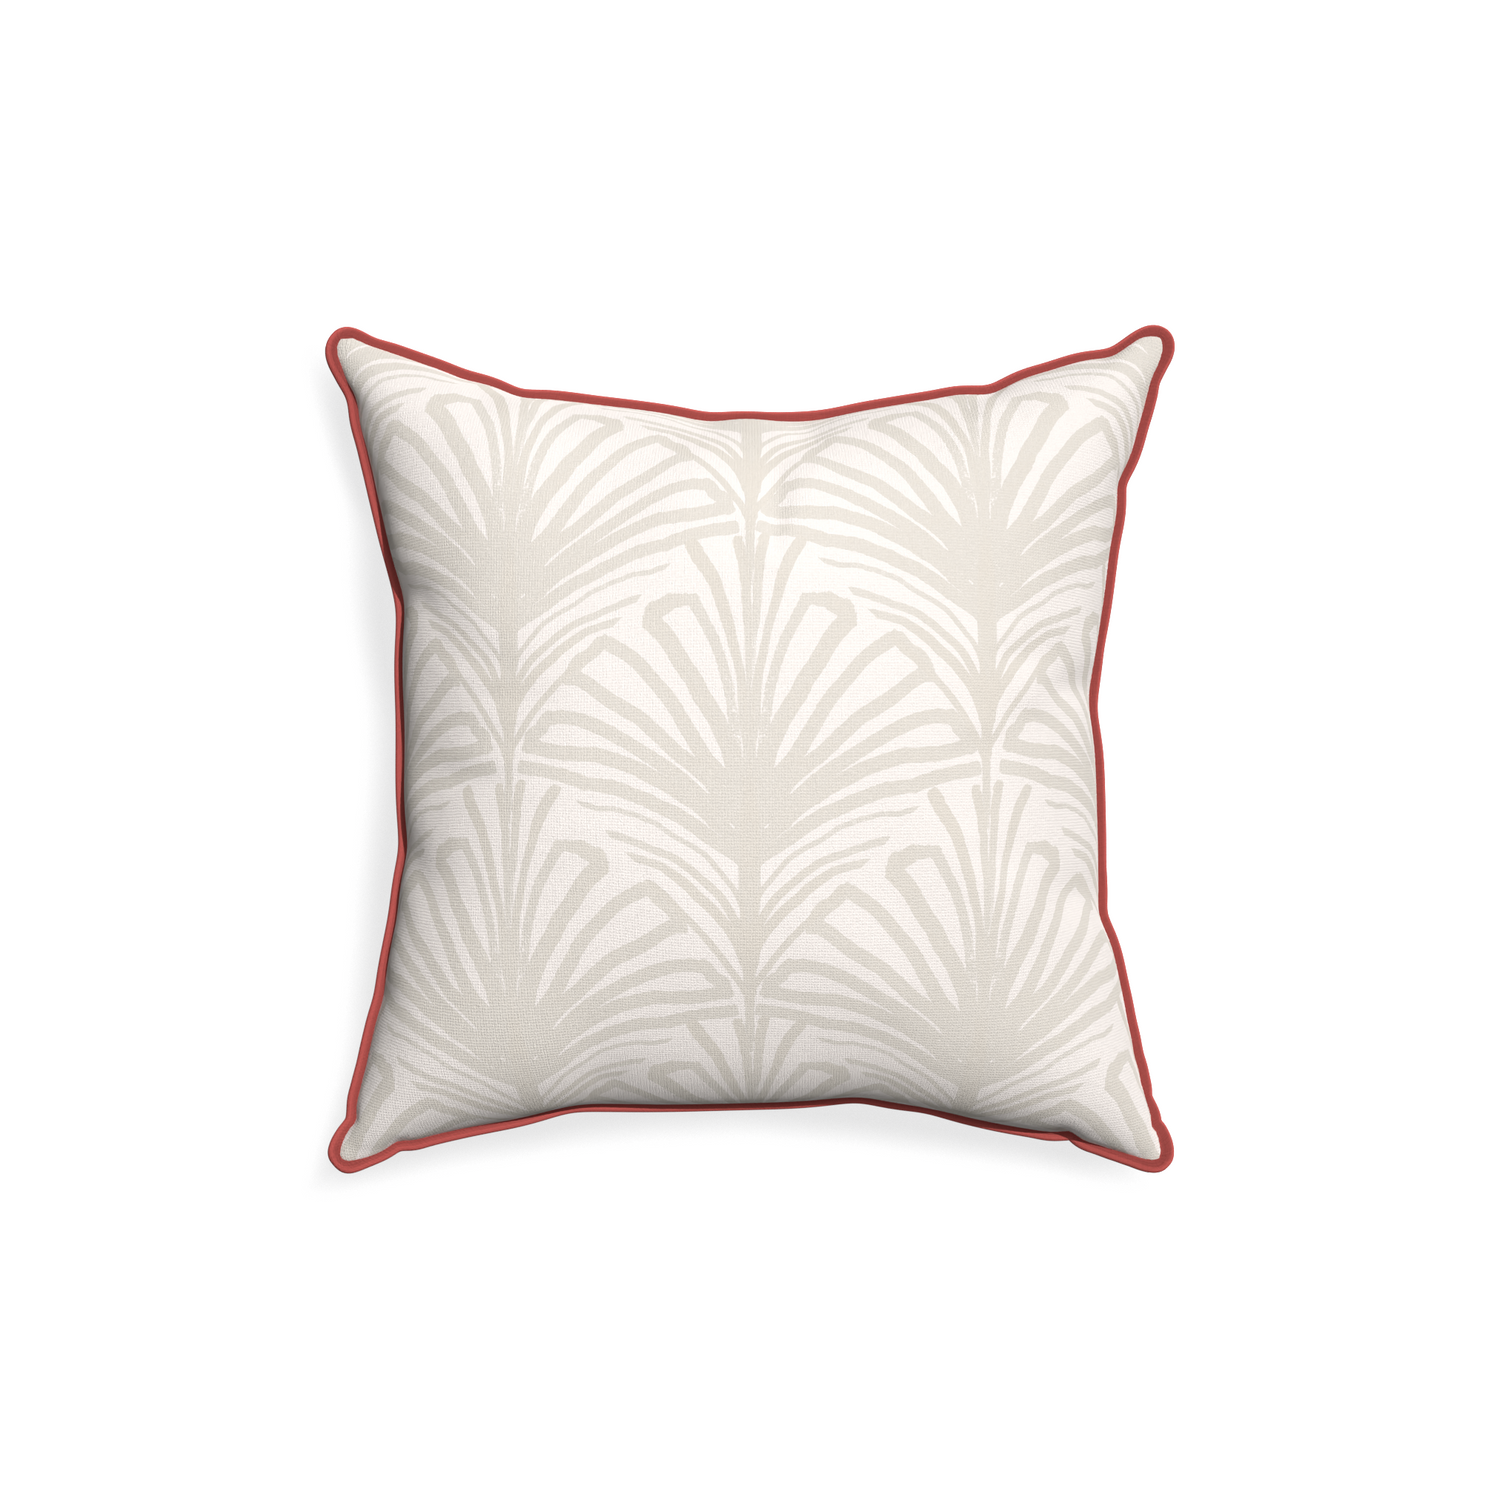 18-square suzy sand custom pillow with c piping on white background